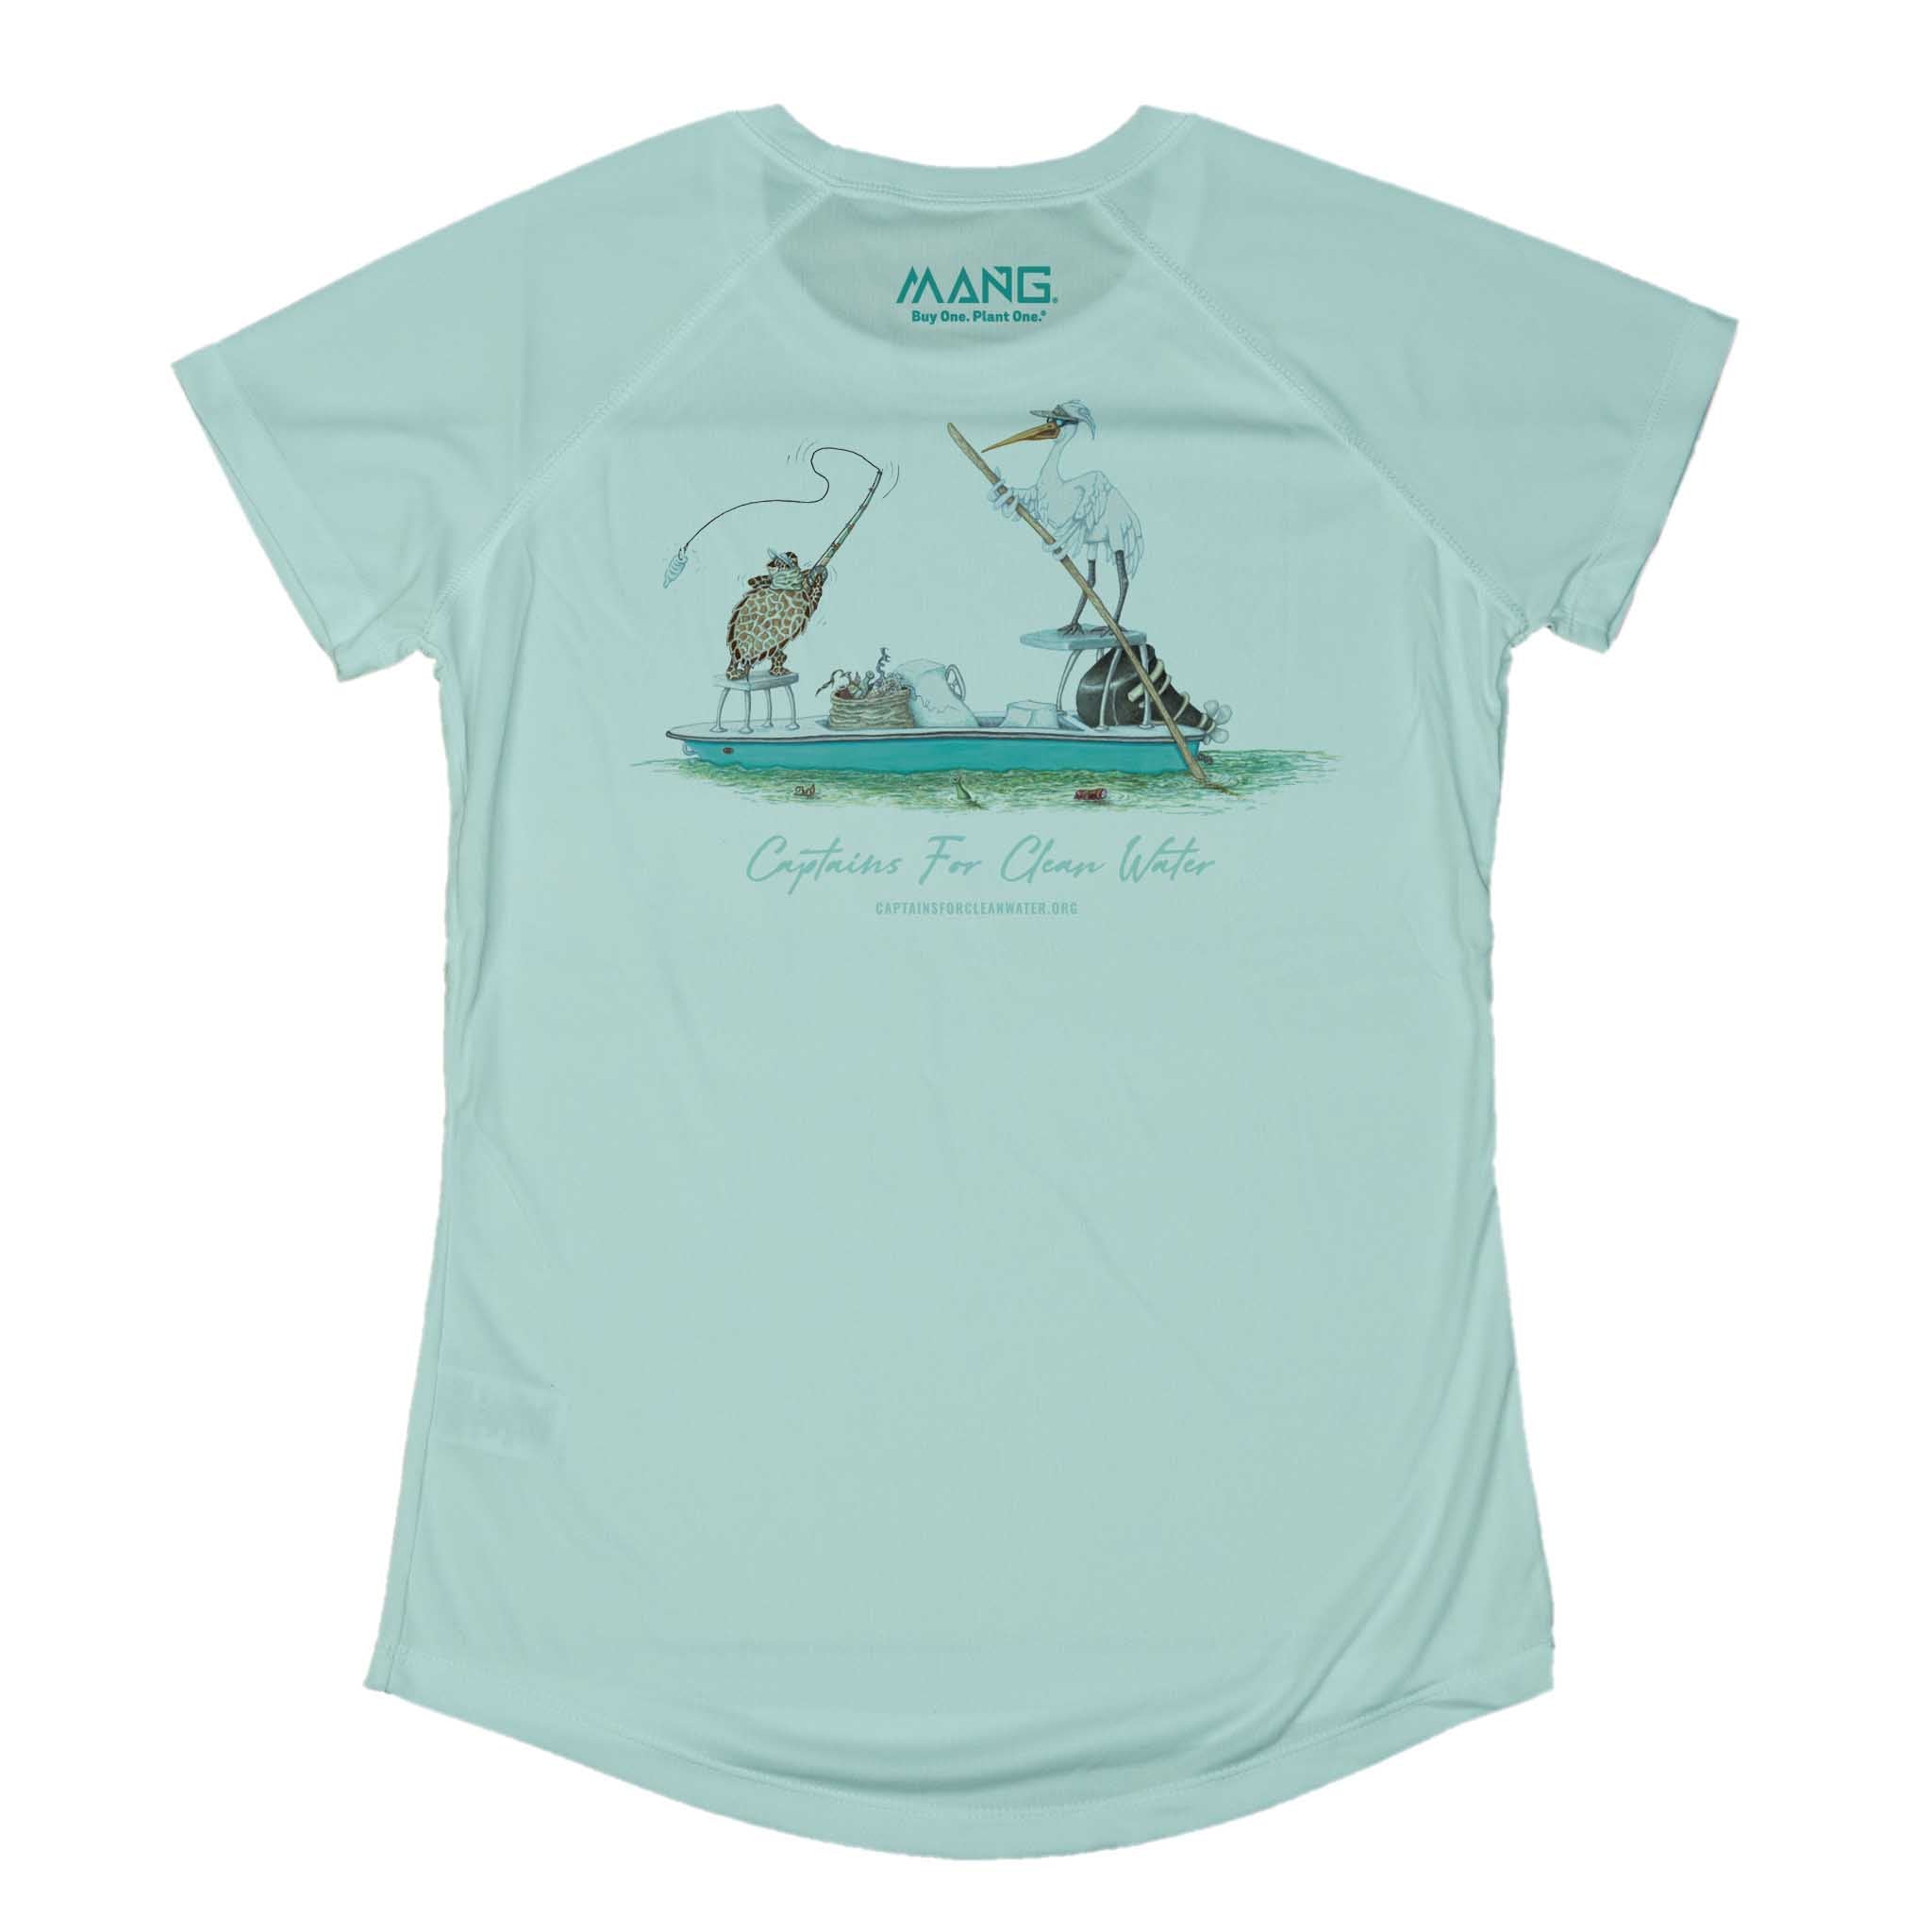 MANG Captain Cleanwater - Women's - SS - XS-Seagrass